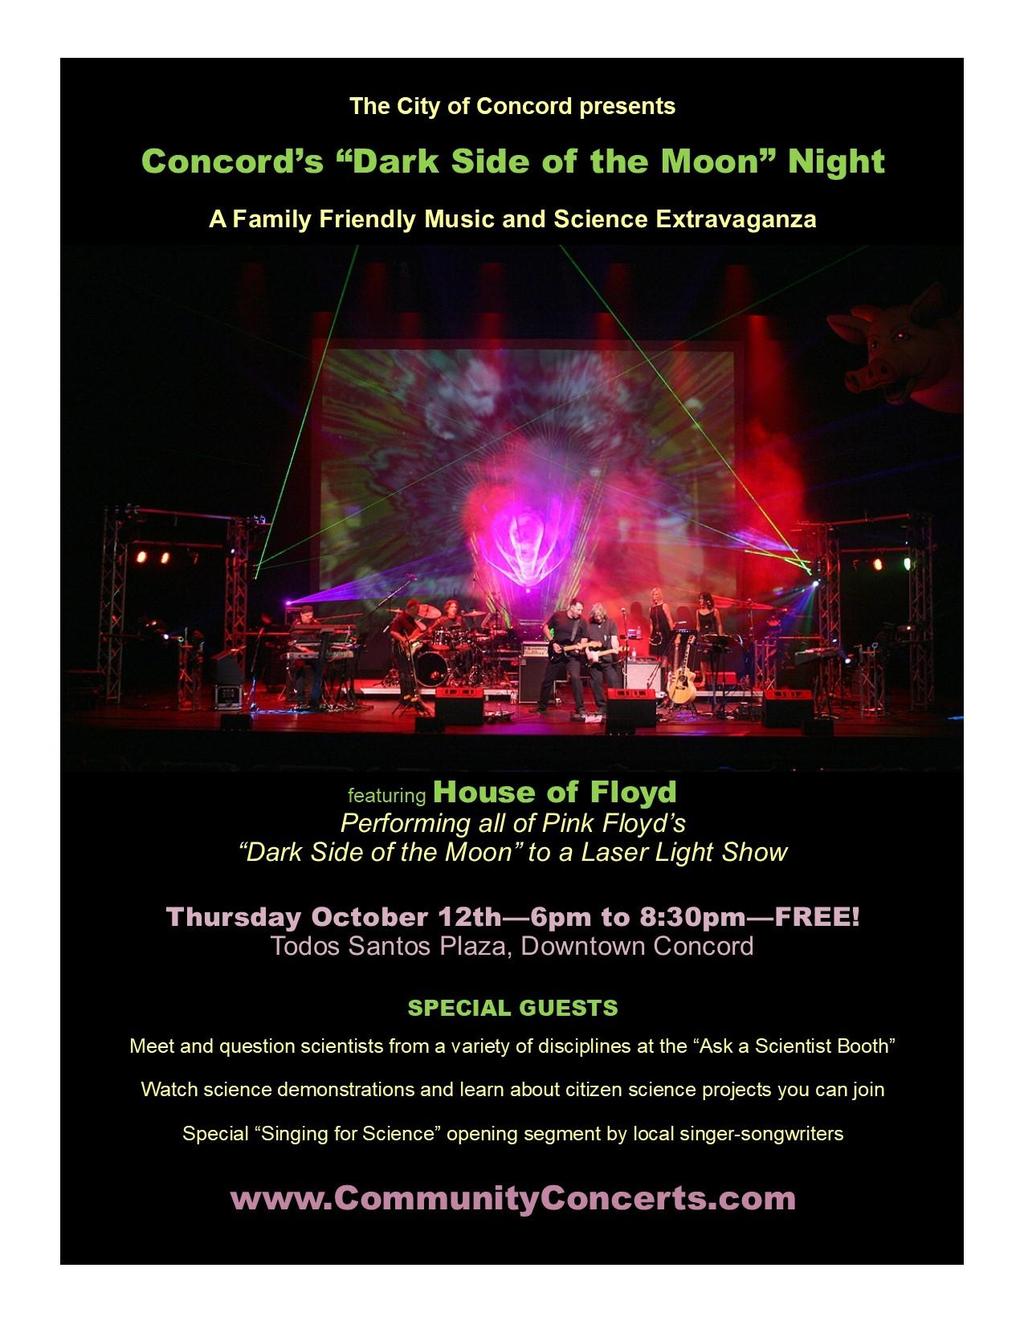 This special music and science event features the excellent Pink Floyd tribute band, House of Floyd, doing all of 'Dark Side of the Moon' with their spectacular laser light show.